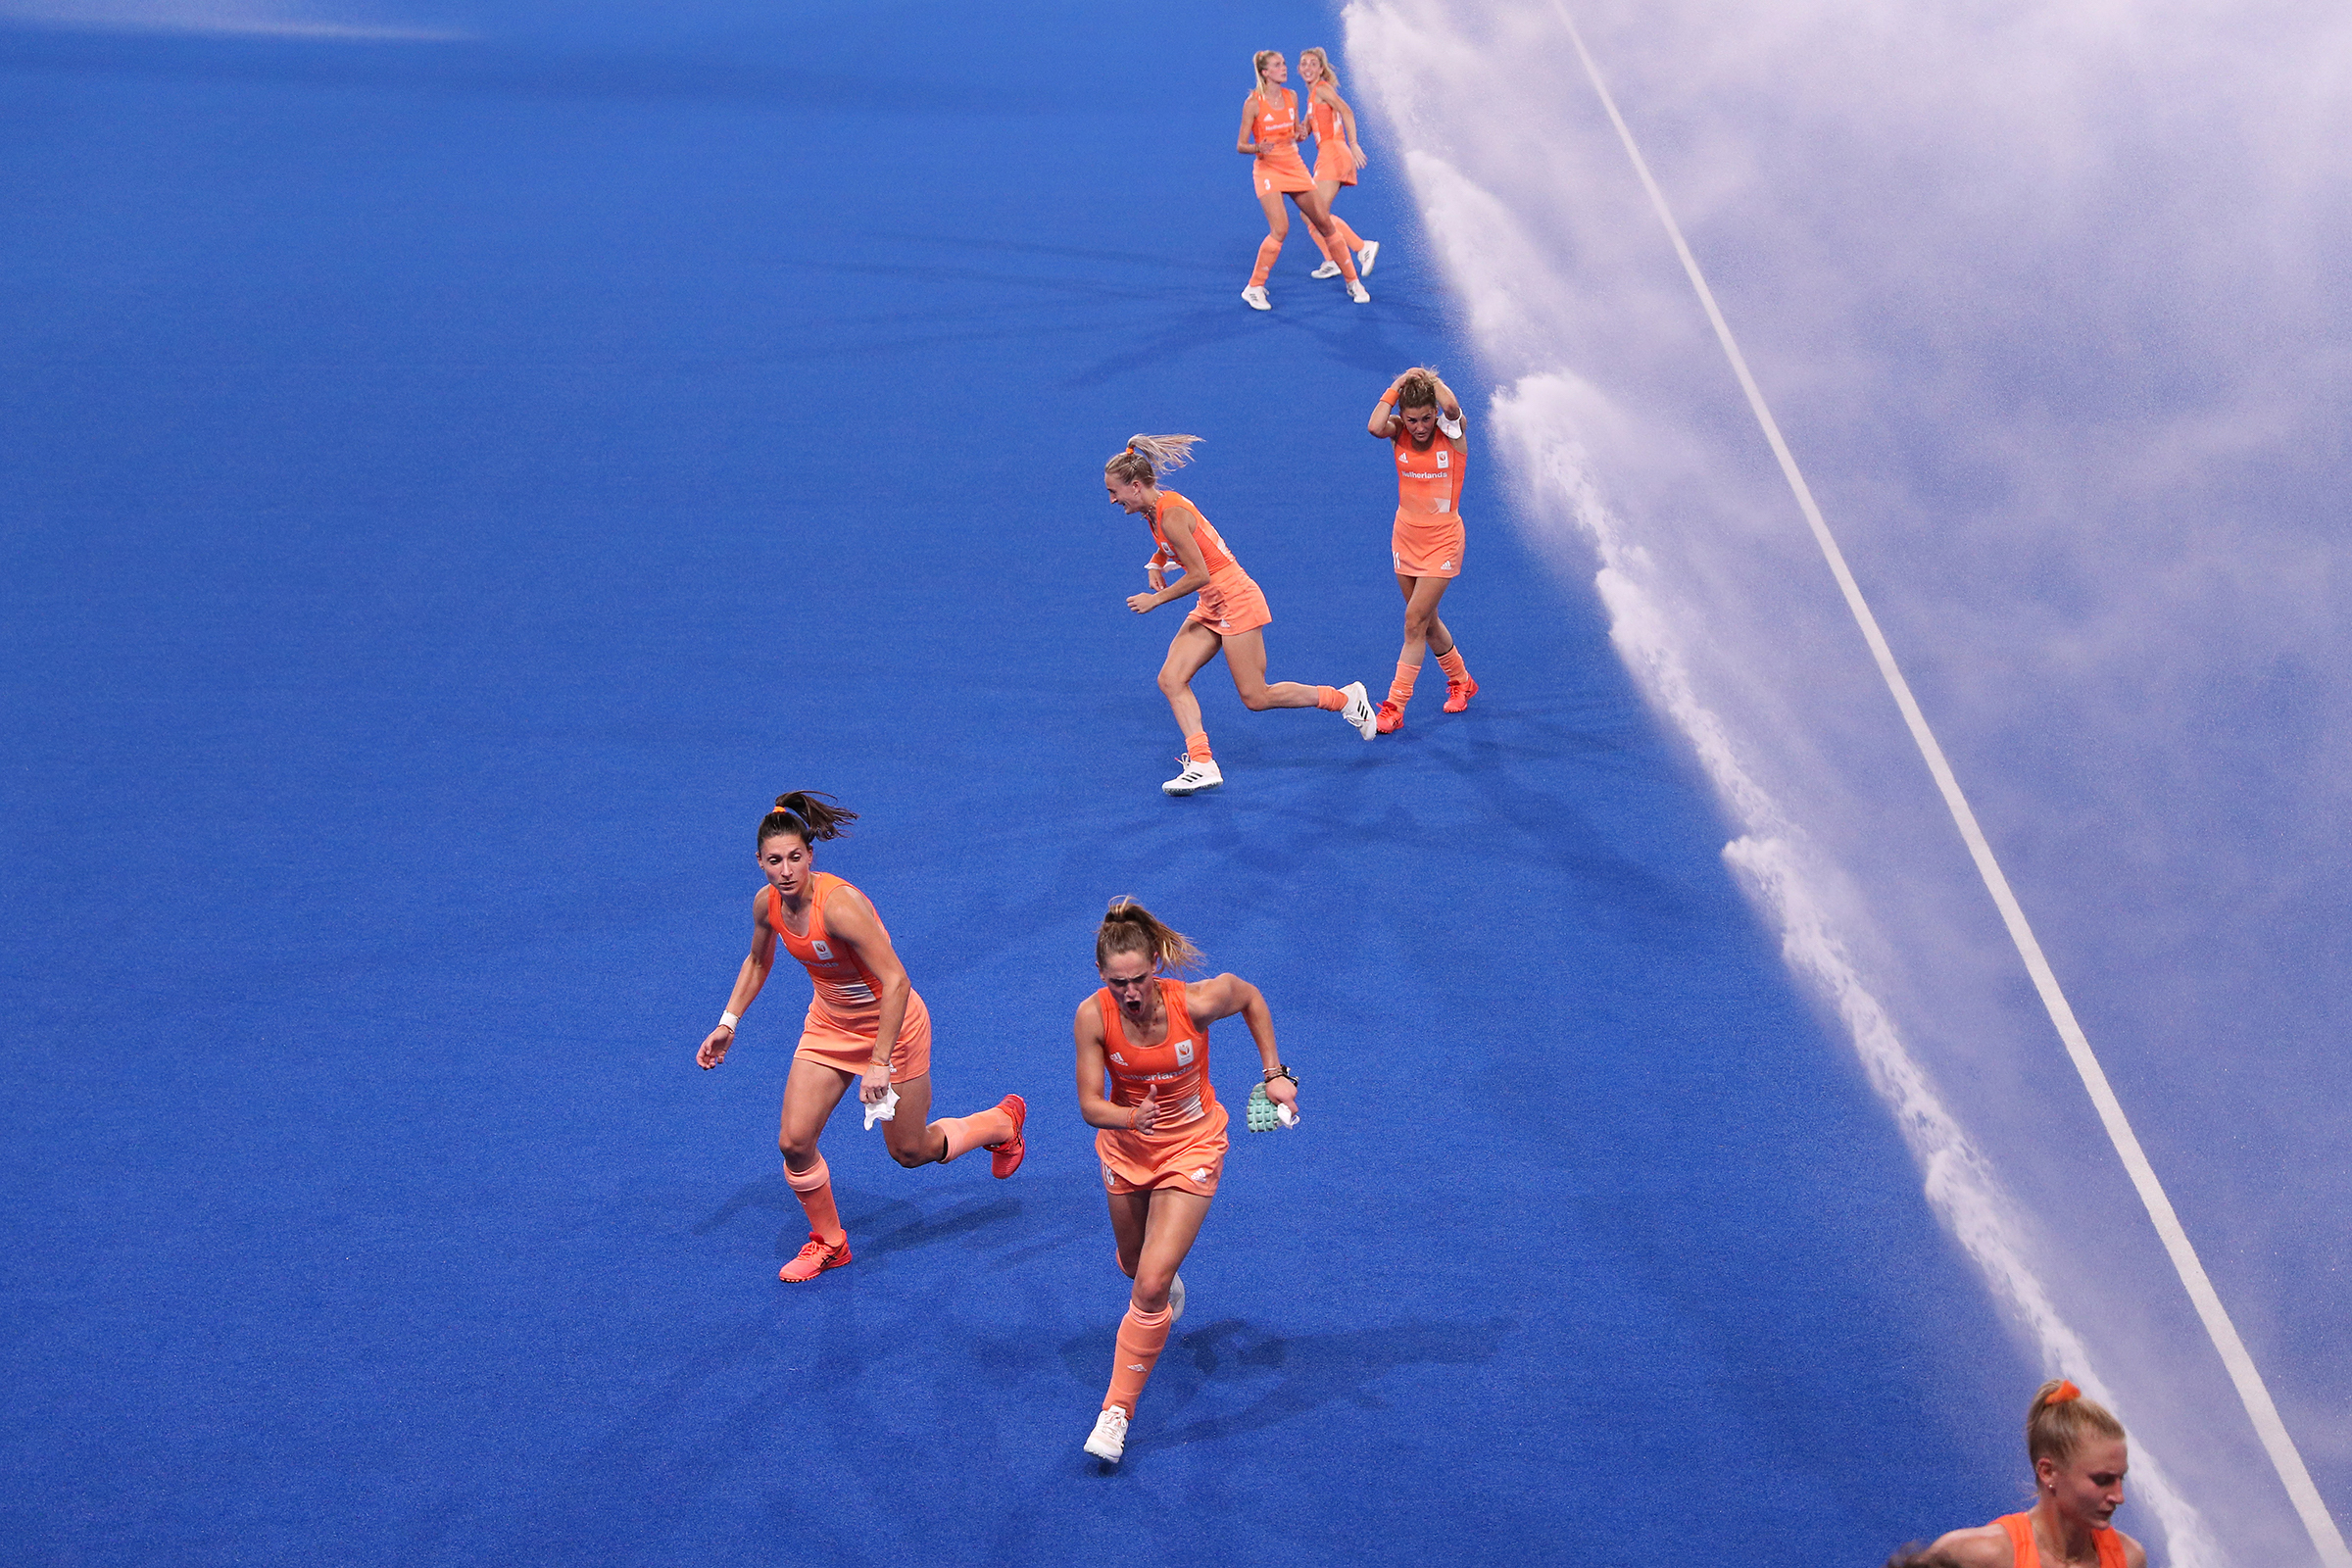 Members of Team Netherlands run from sprinklers ahead of a field hockey match against Germany that determined the Pool A winner at the Tokyo Olympics on July 31. Netherlands won 3-1. (Steph Chambers—Getty Images)